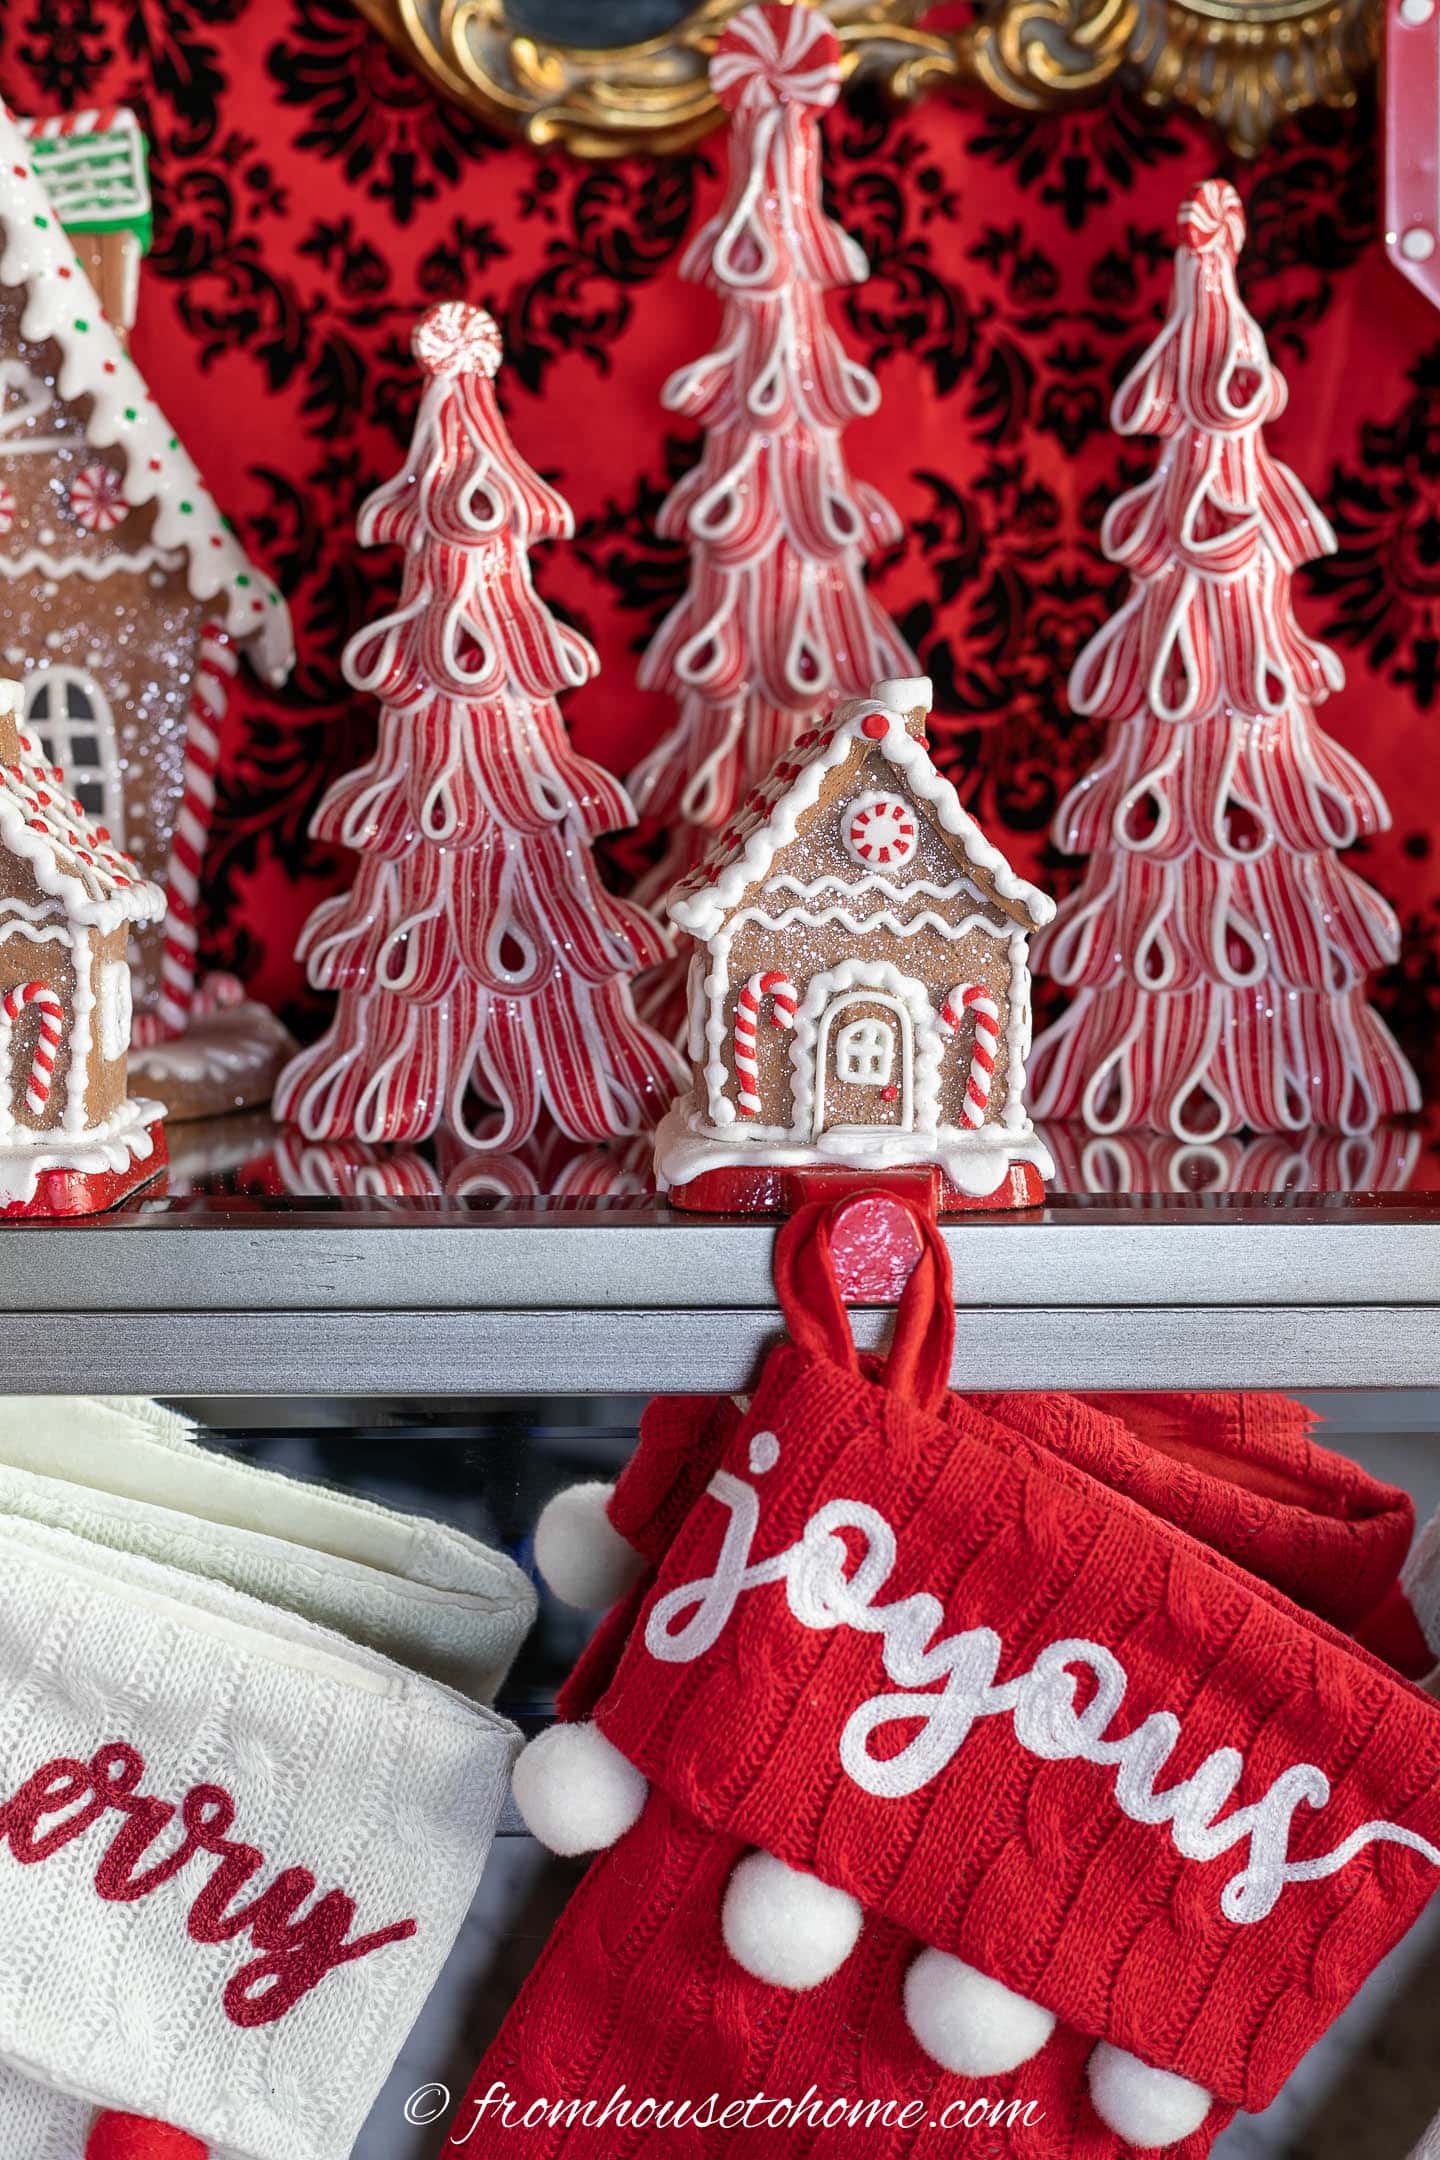 Gingerbread house stocking holder on a mantel in front of red and white tree Christmas decorations